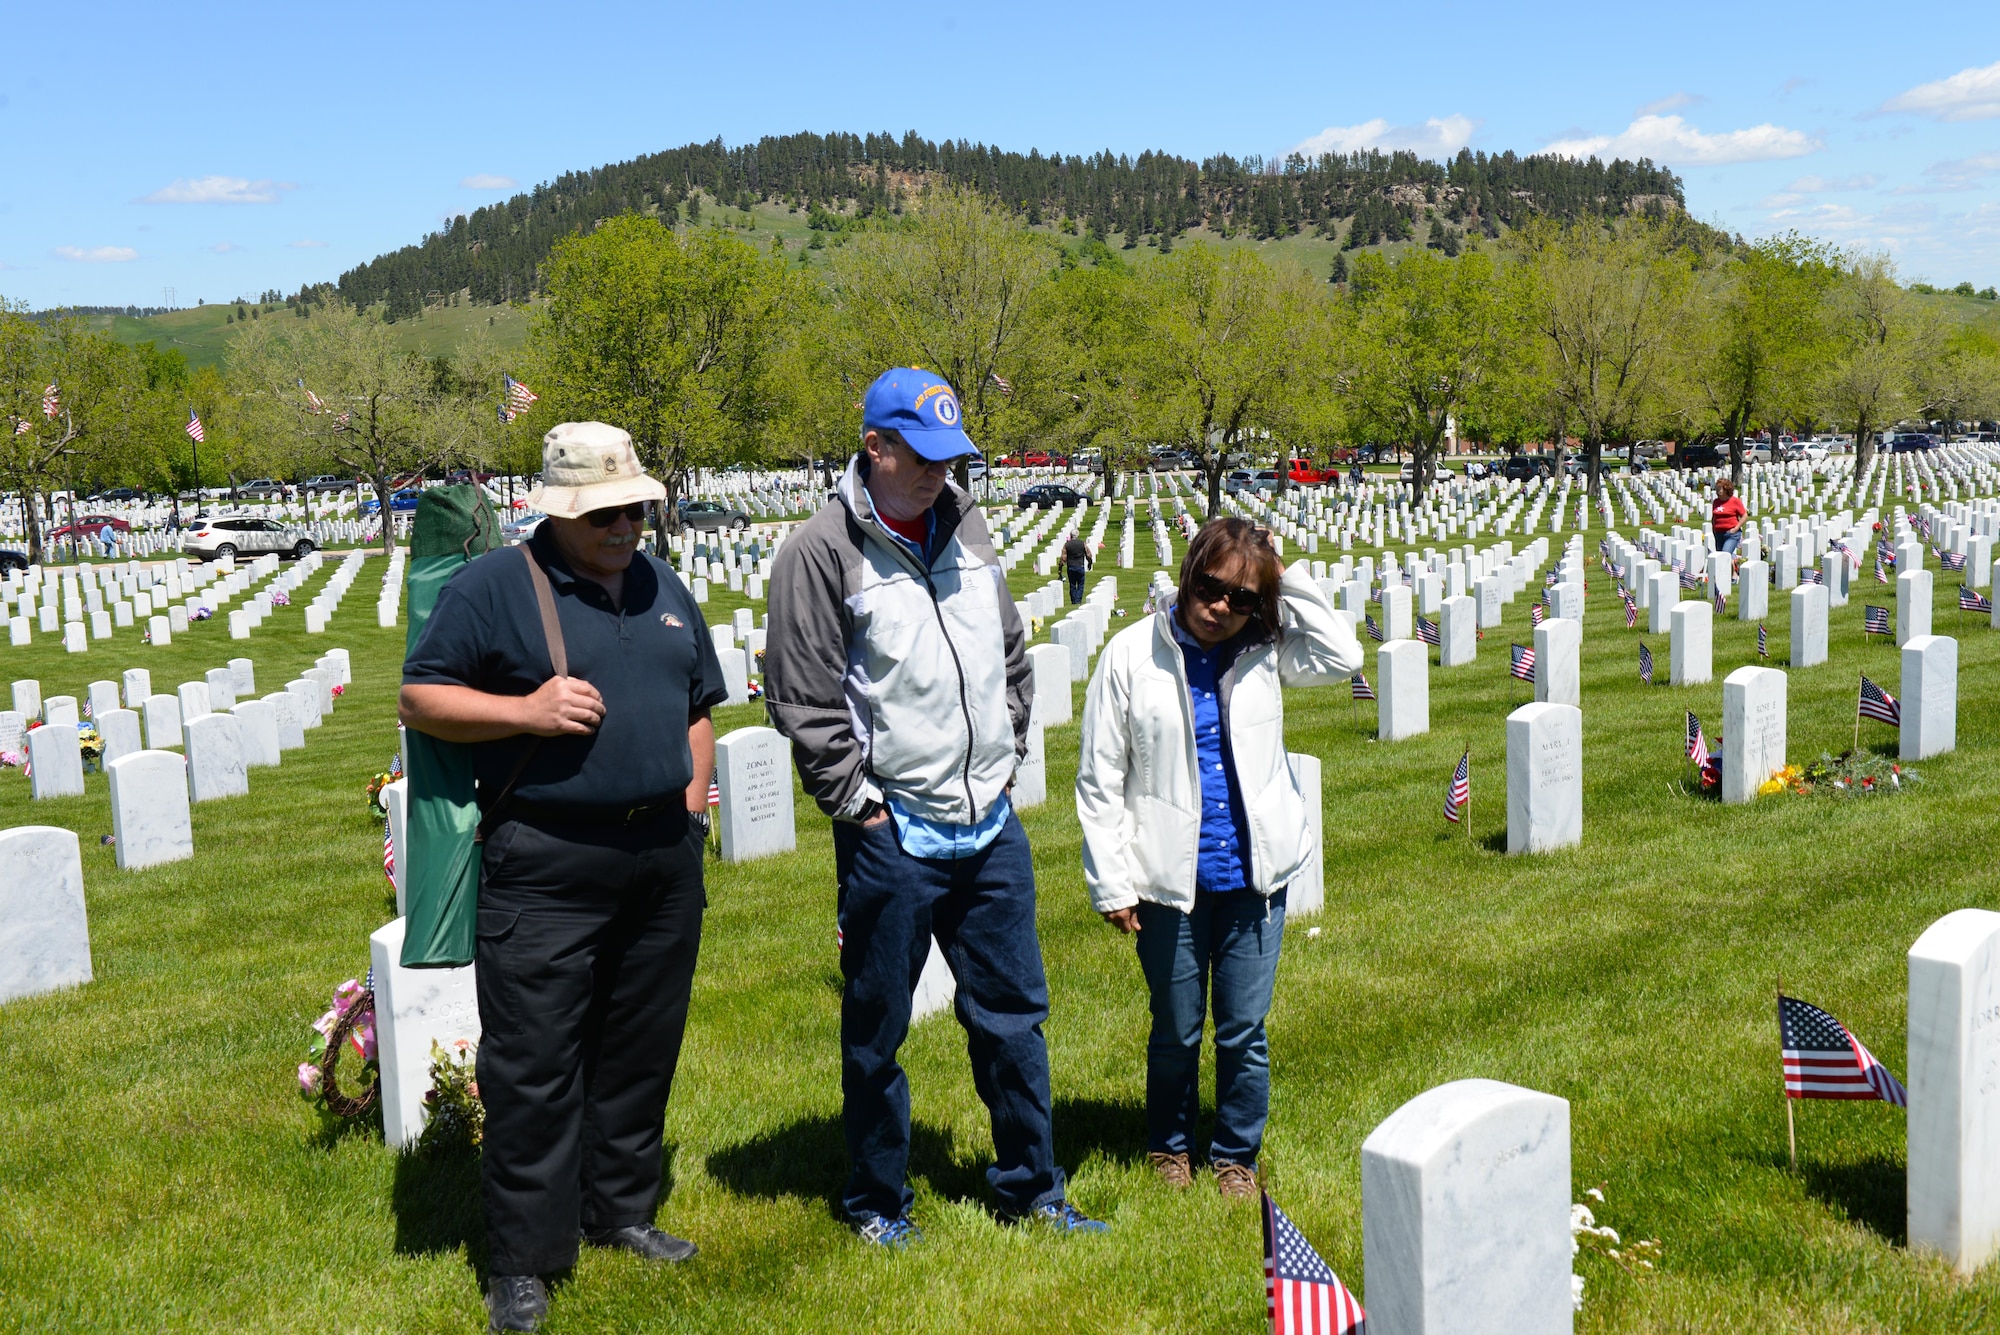 A family visits their loved one buried at the Black Hills National Cemetery, S.D., May 29, 2017. Families come from all over the United States to see their family members on Memorial Day to remember and honor them. (U.S. Air Force photo by Airman Nicolas Z. Erwin)